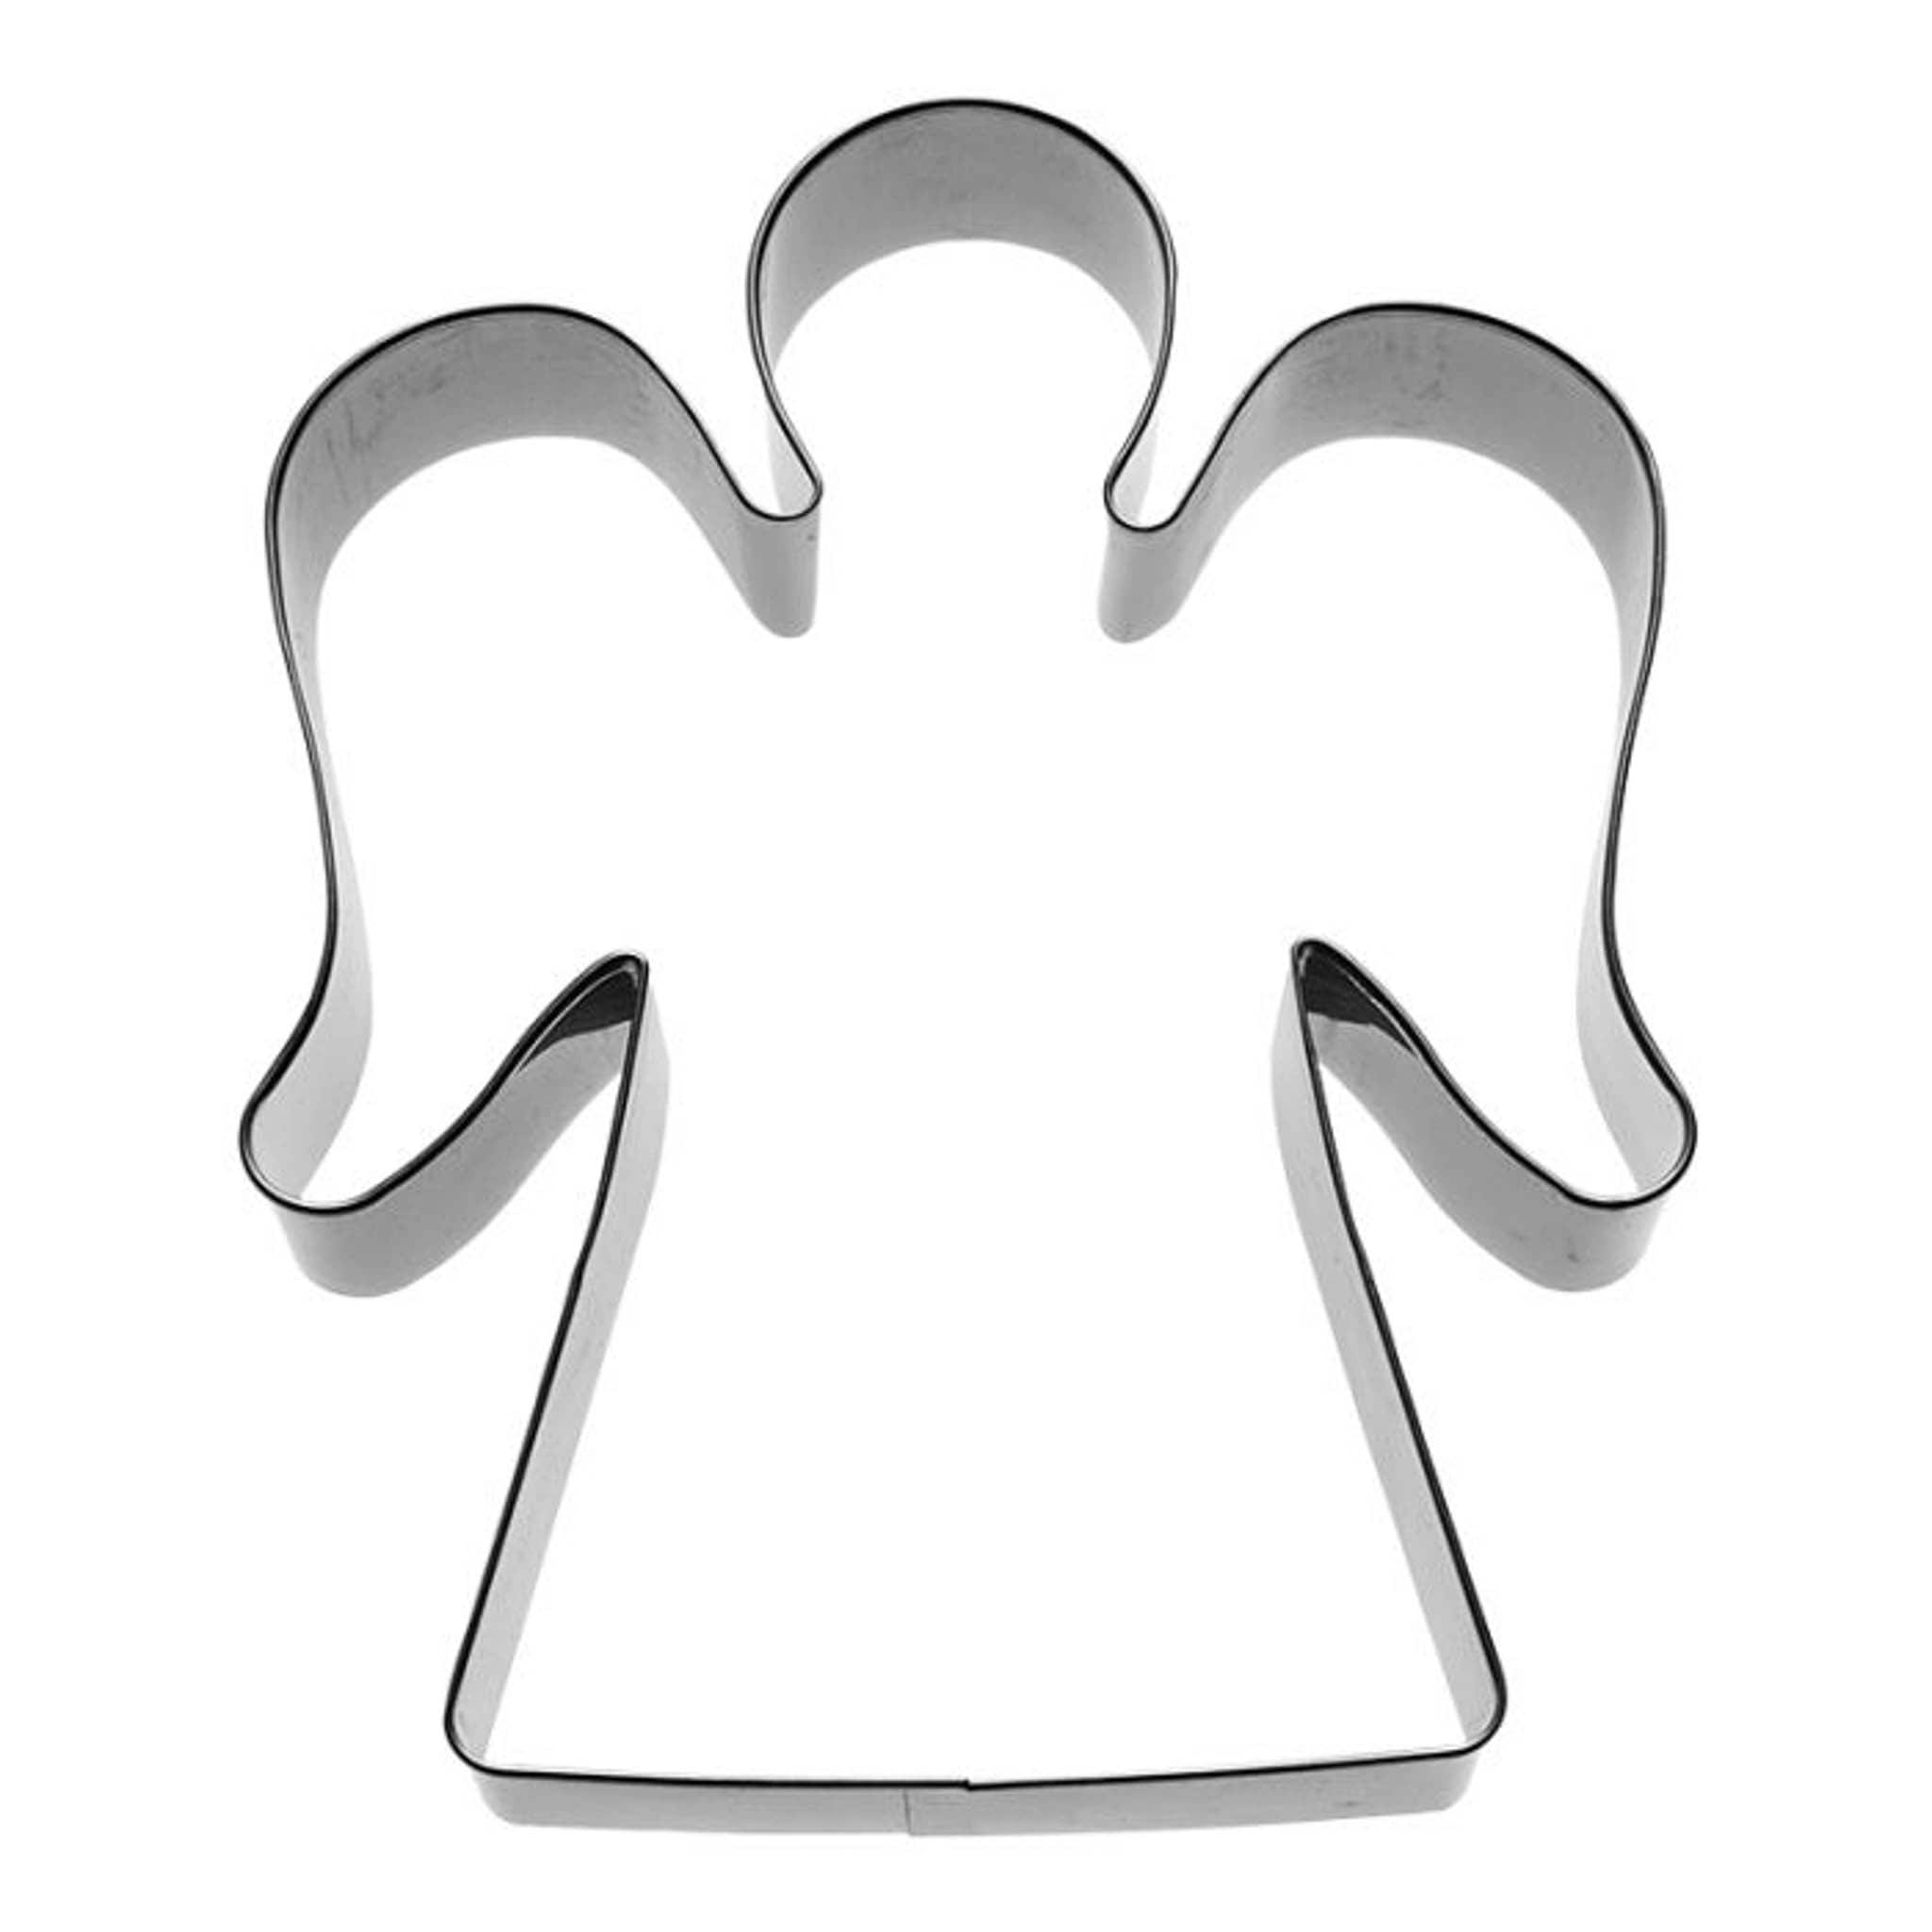 Stainless Steel Angel Cookie Cutter, 6cm